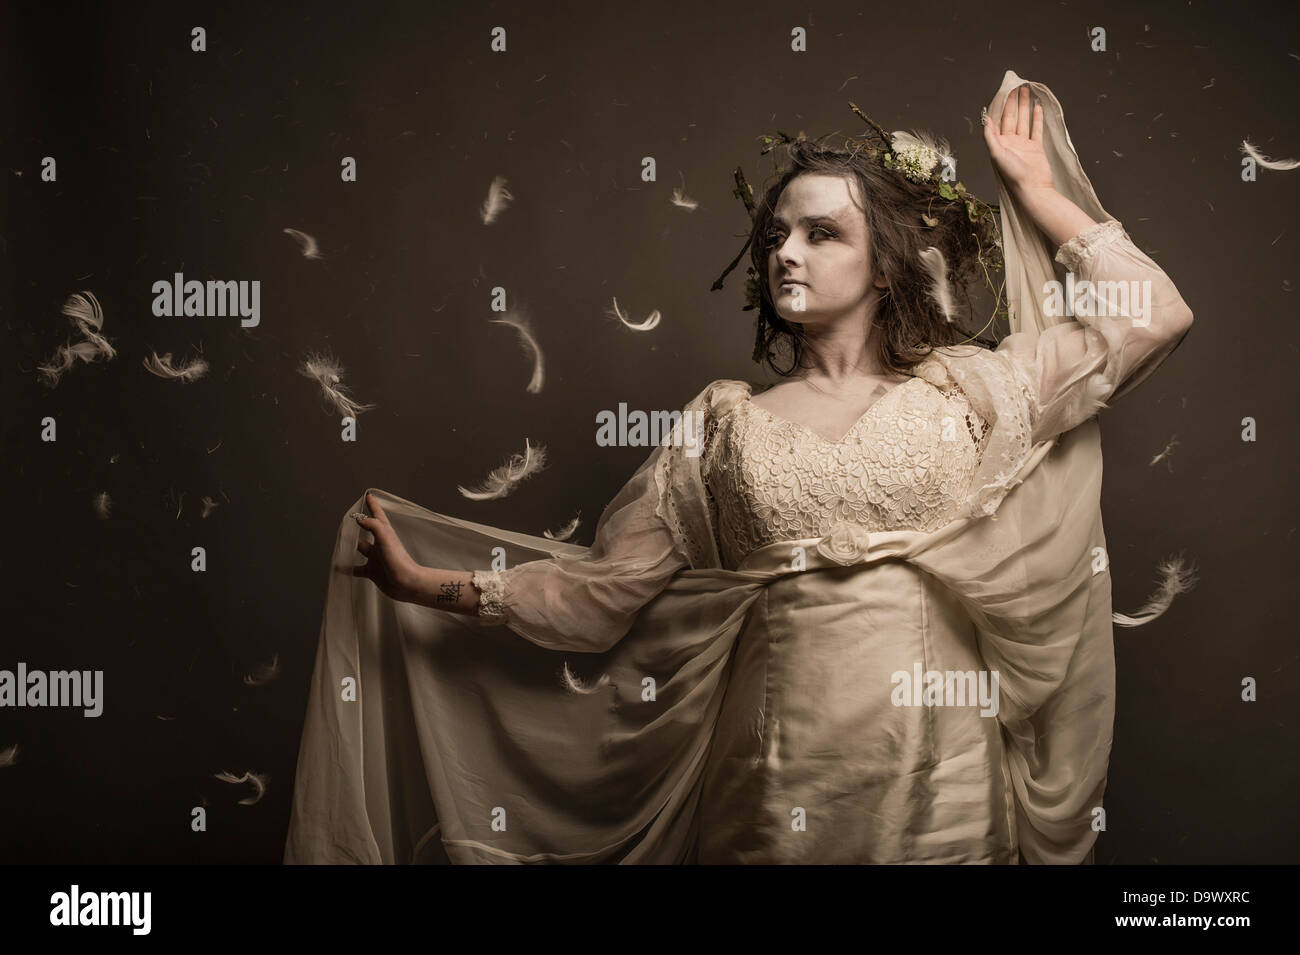 A fantasy makeover photo session - woman girl dressed as pale ghostly woodland spirit creature Stock Photo